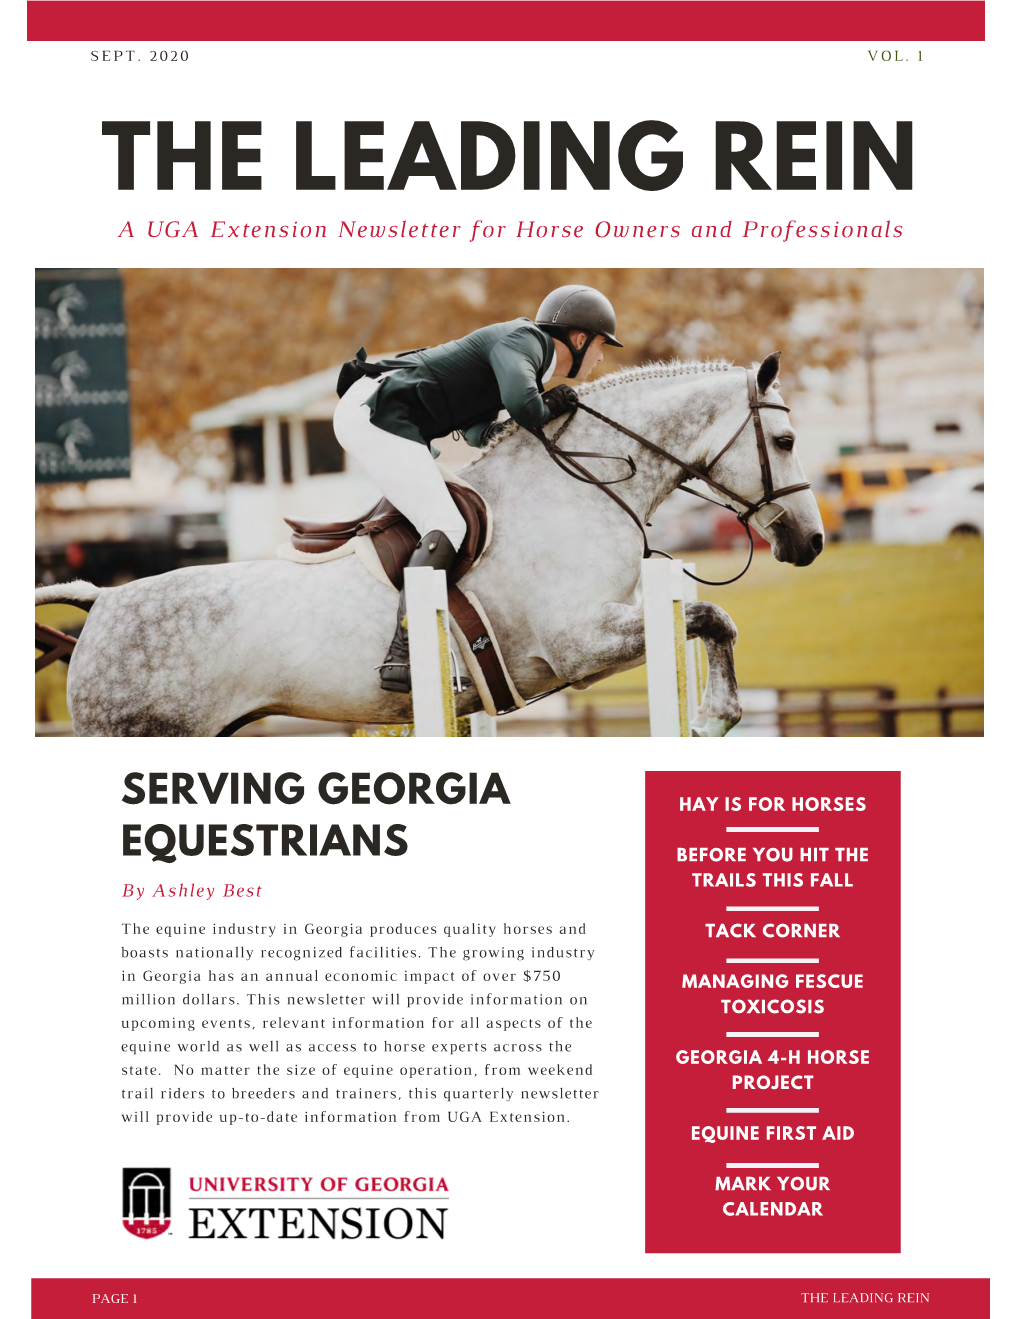 THE LEADING REIN a UGA Extension Newsletter for Horse Owners and Professionals